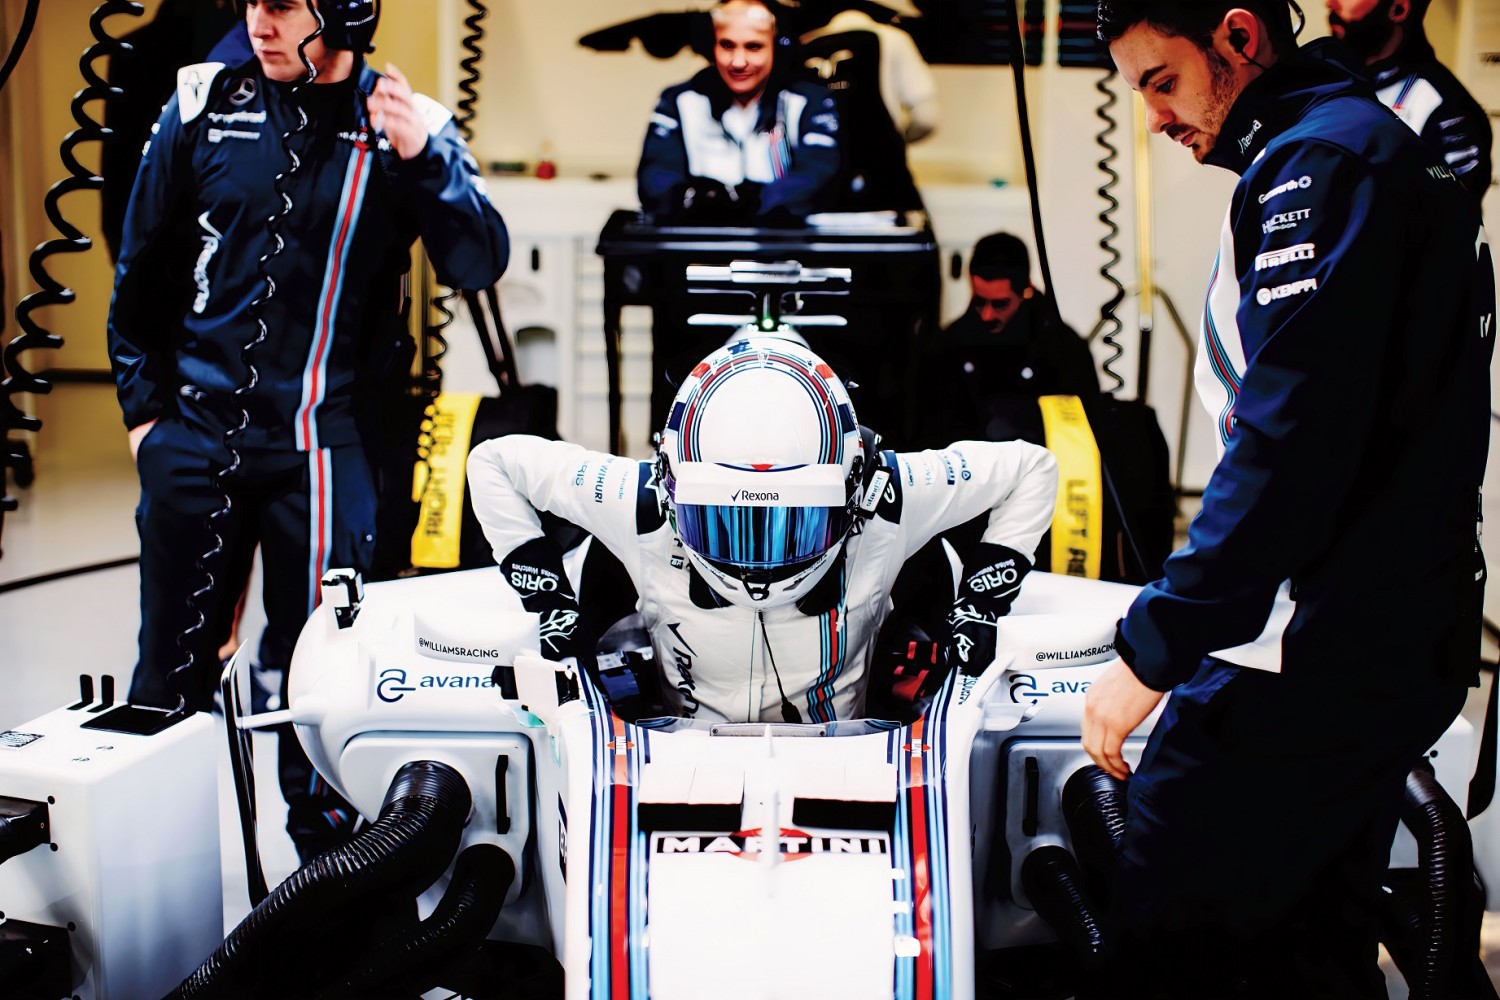 Wolff gets ready to race at the Williams F1 Collateral Filming Days in Jerez, Spain 